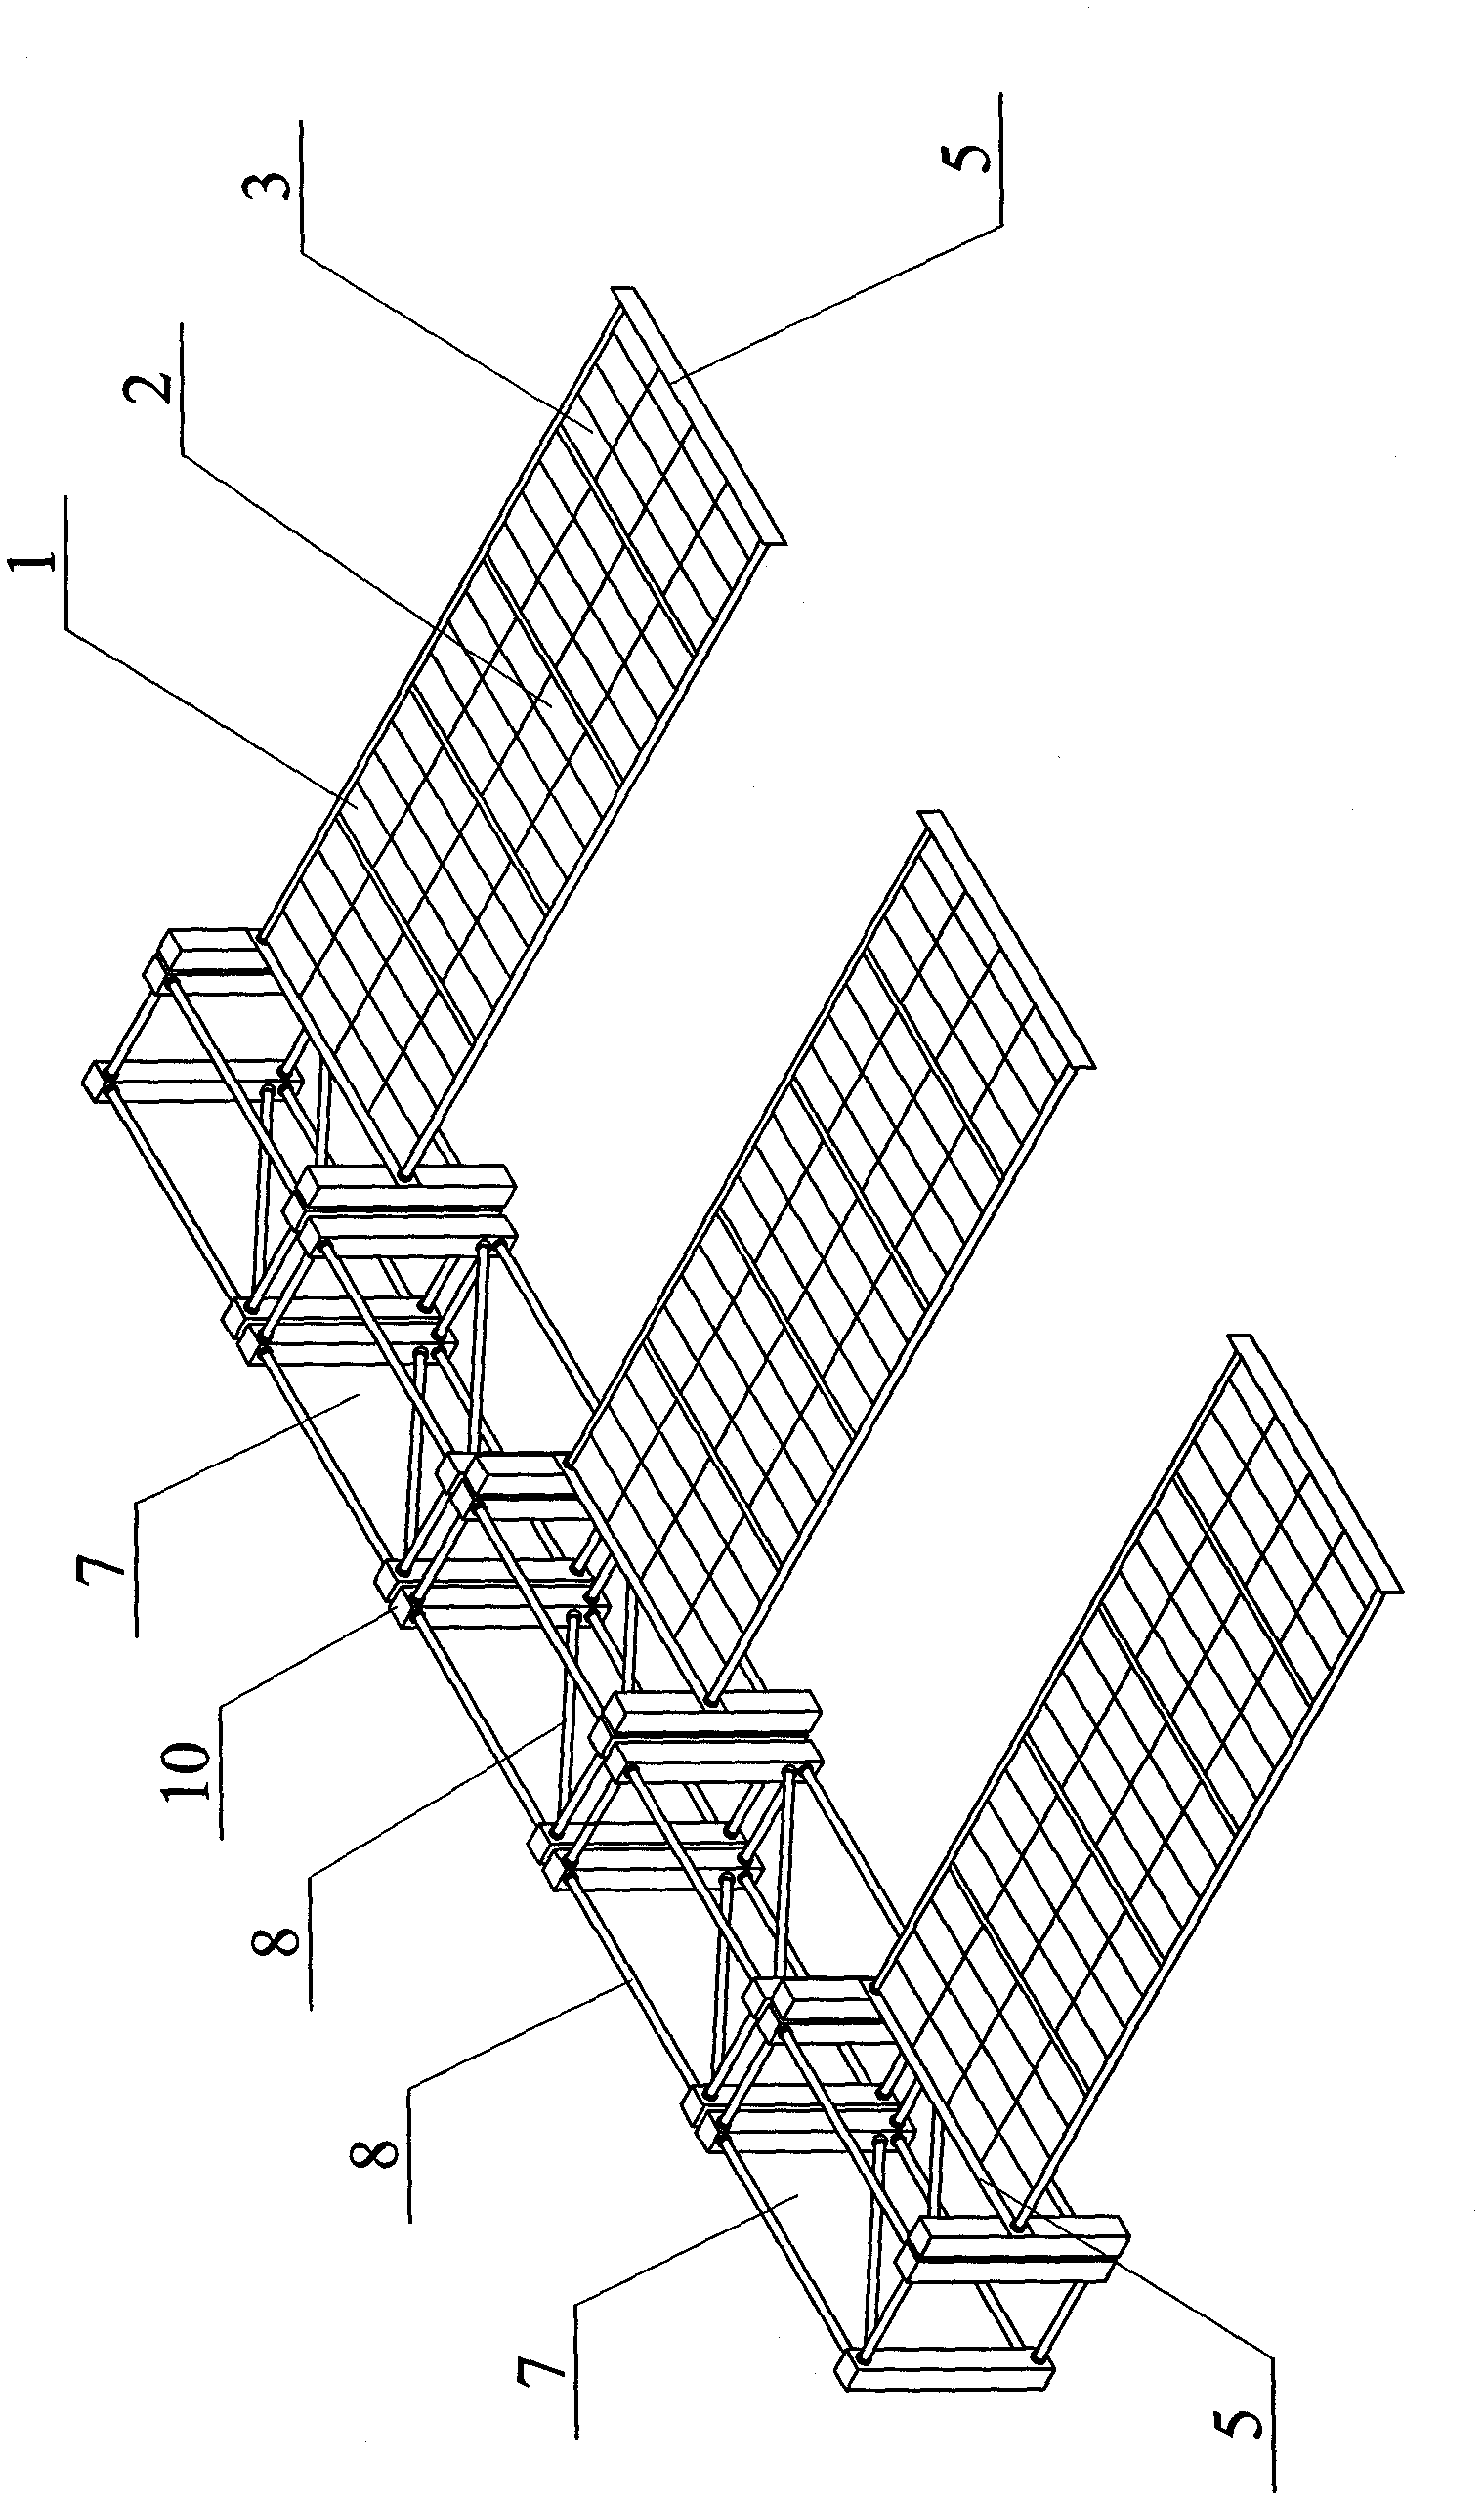 Inflation expansion truss solar panel array capable of on-orbit assembly